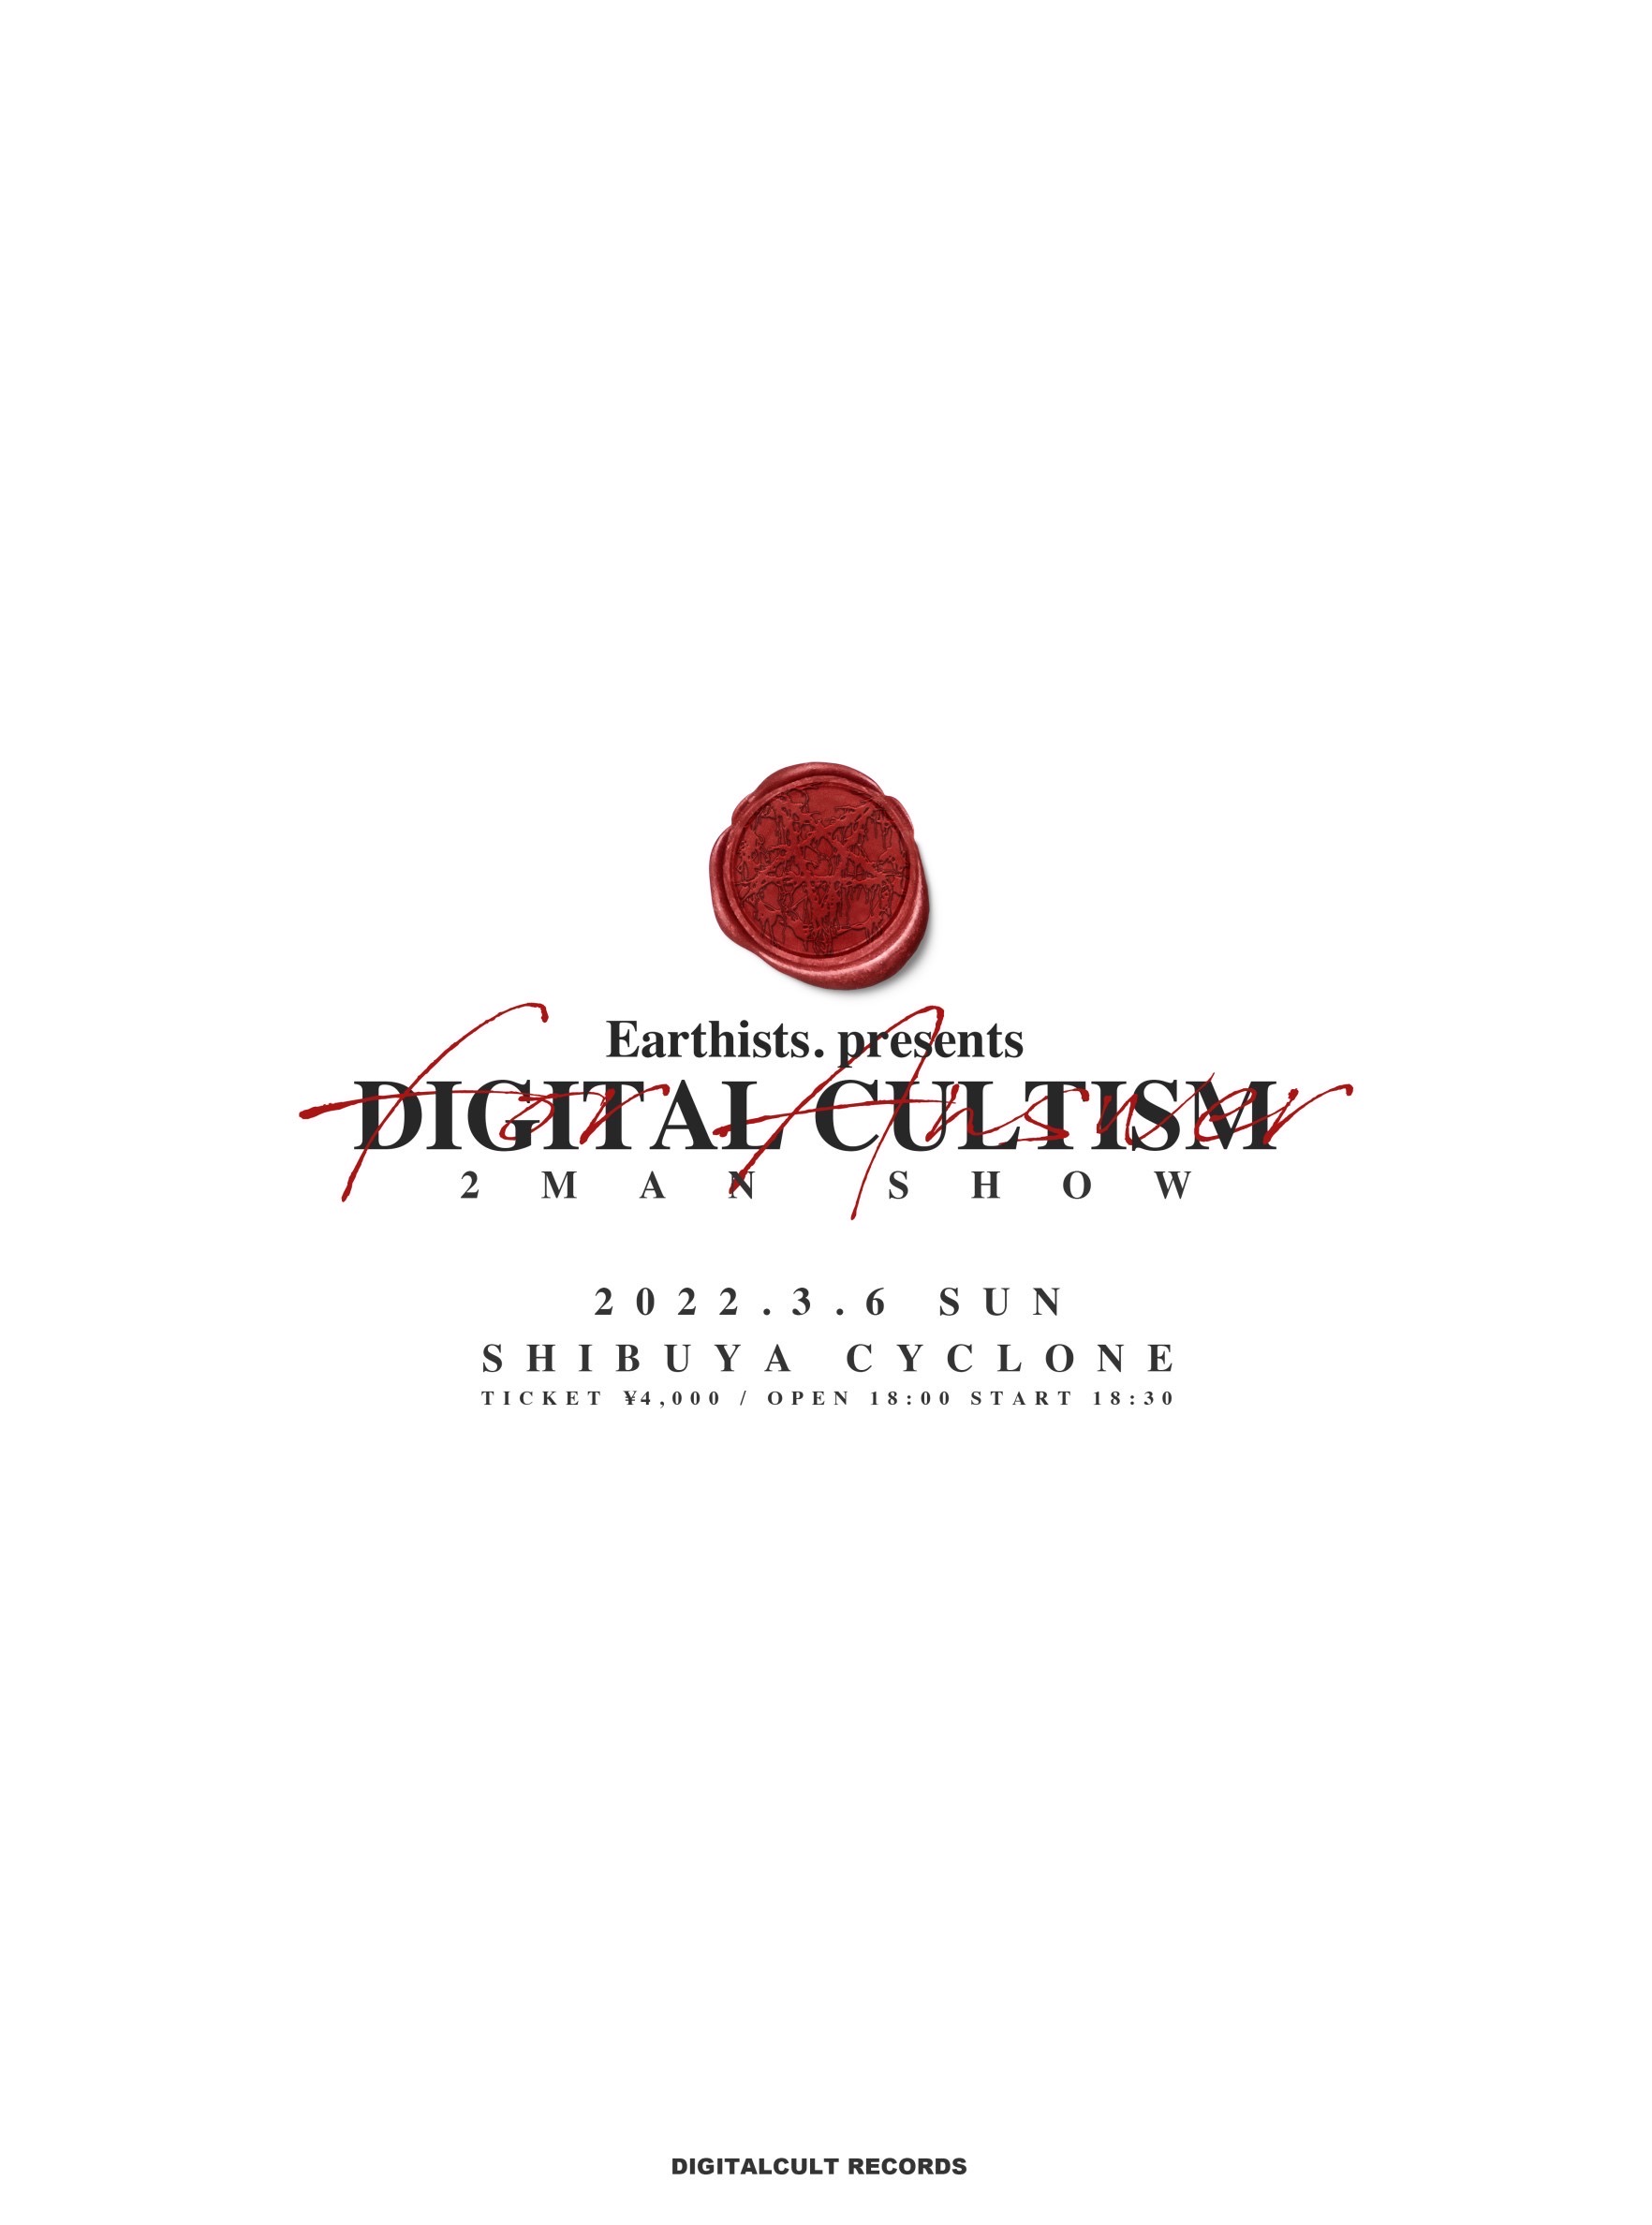 Earthists. pre. DIGITAL CULTISM FOR ANSWER開催決定！